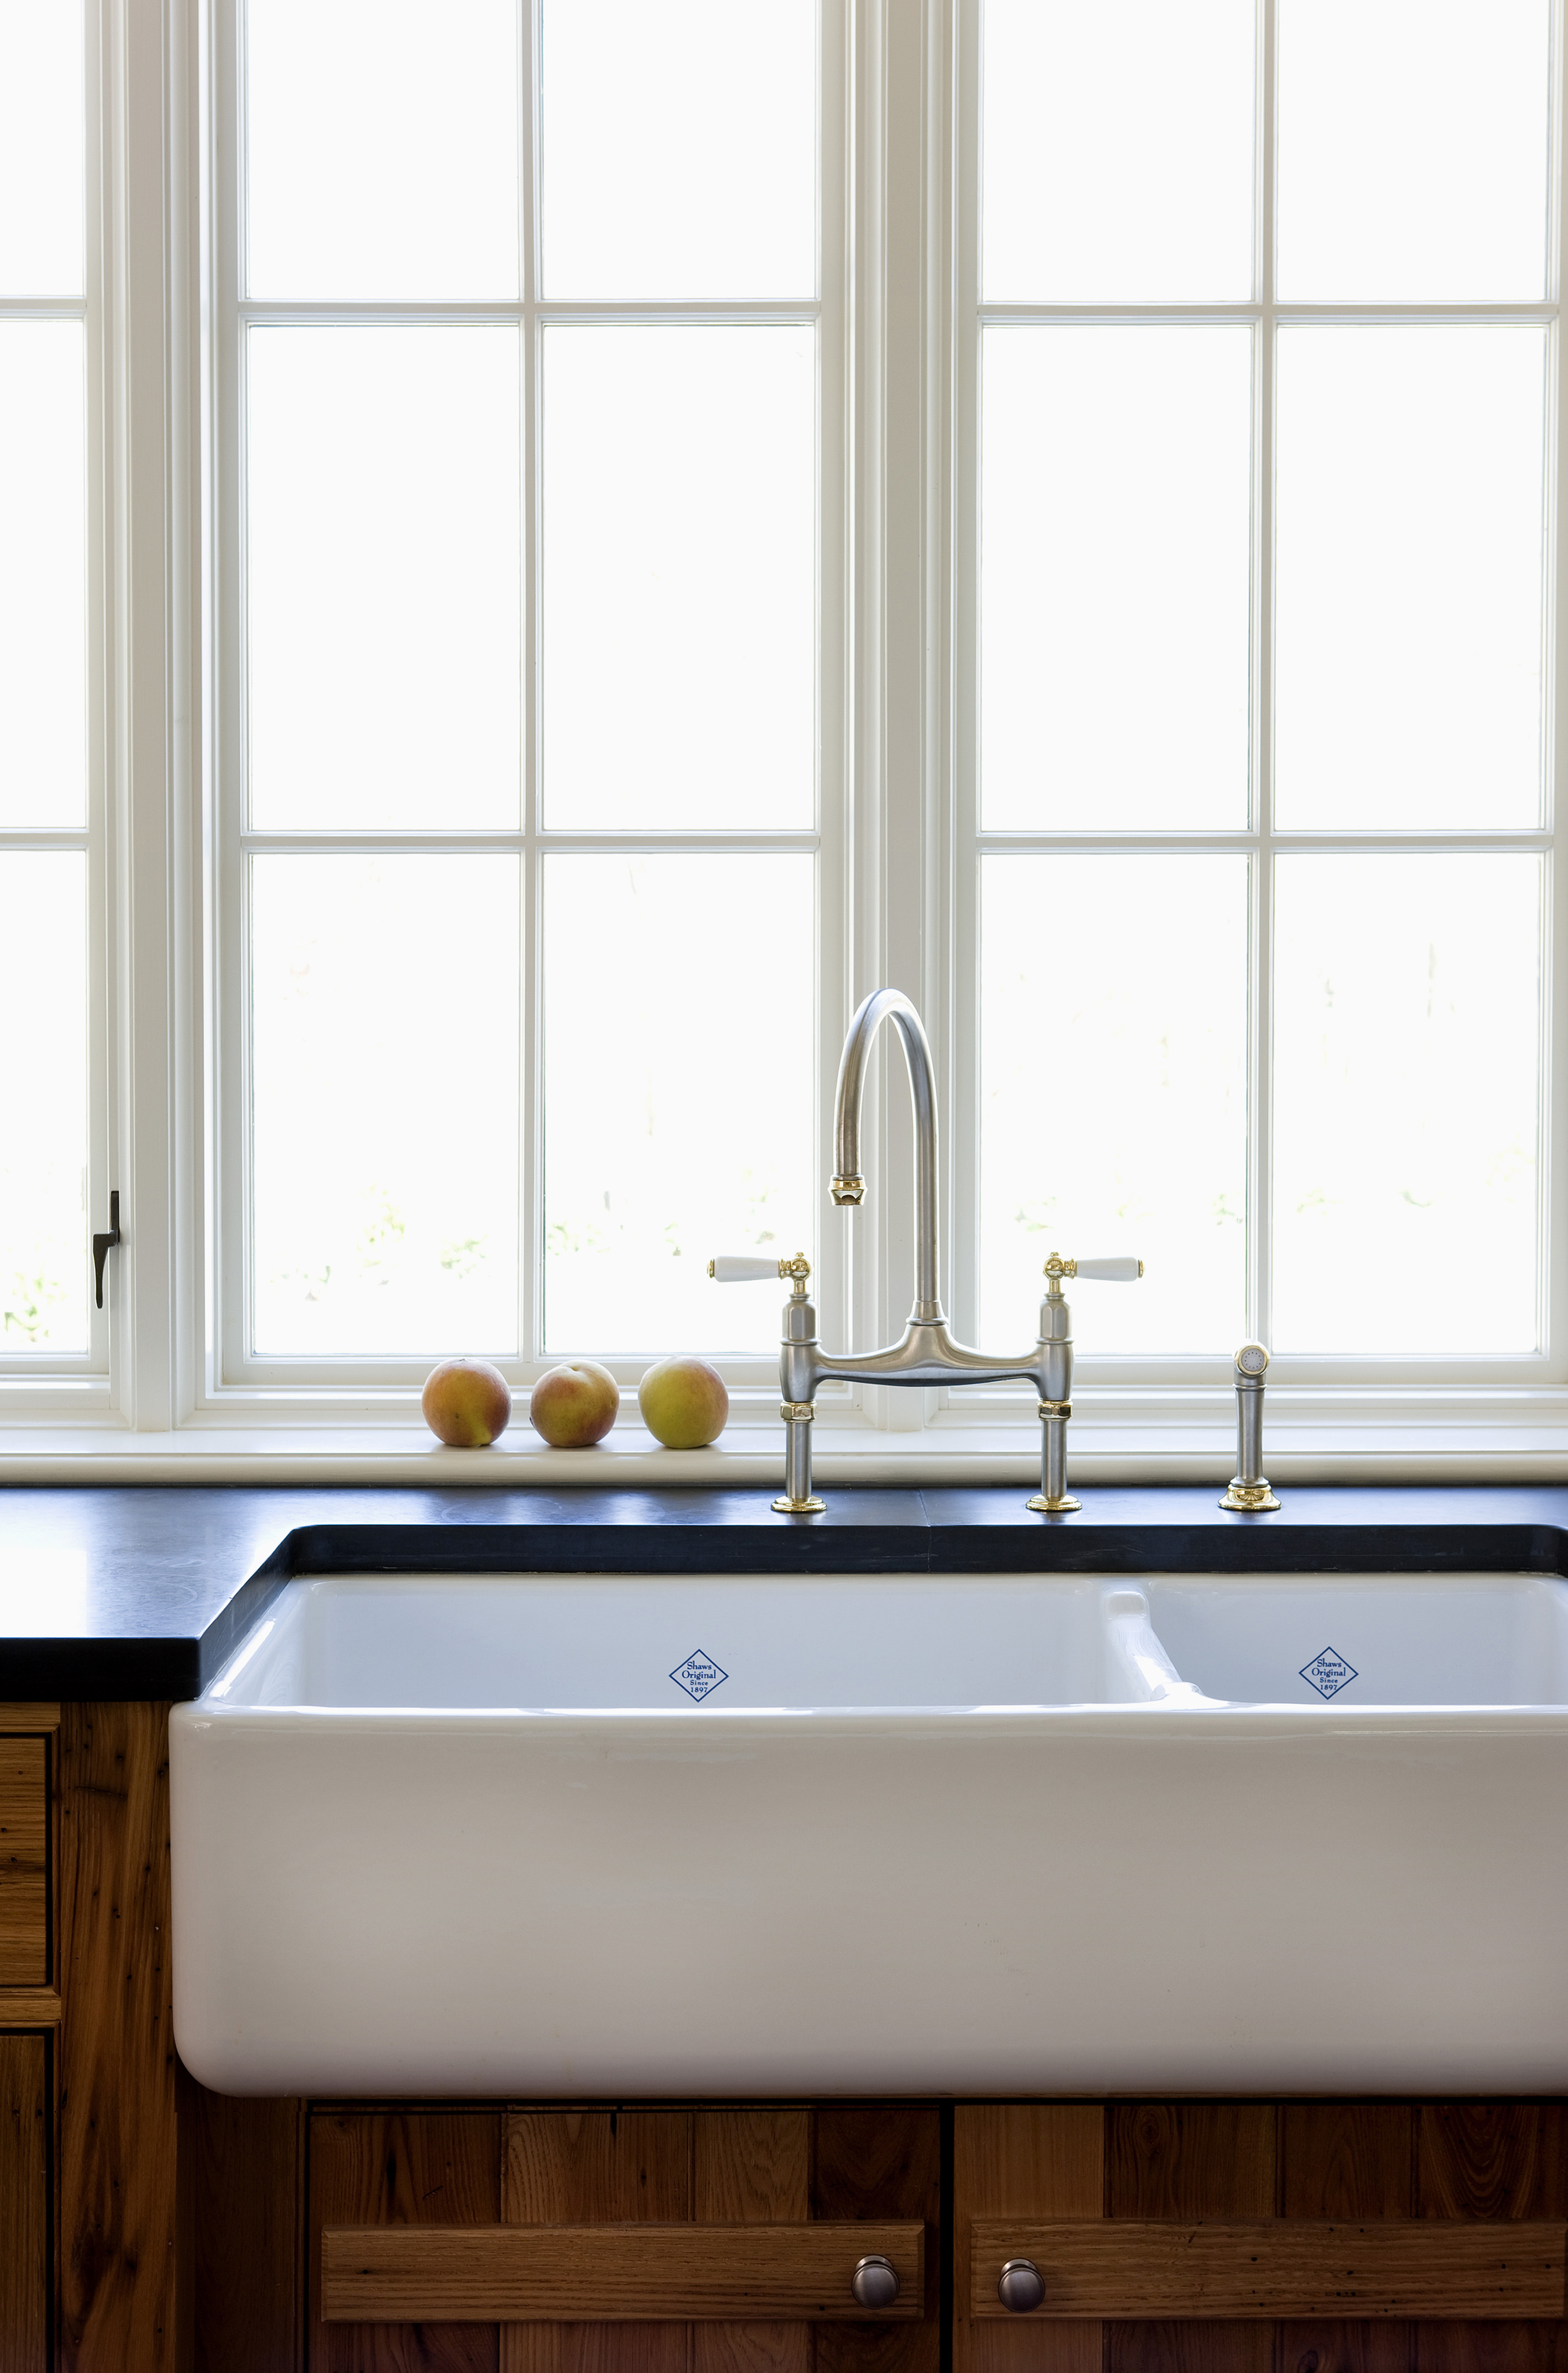 A farmhouse-style kitchen sink with a modern faucet set in front of a window, flanked by wooden cabinets